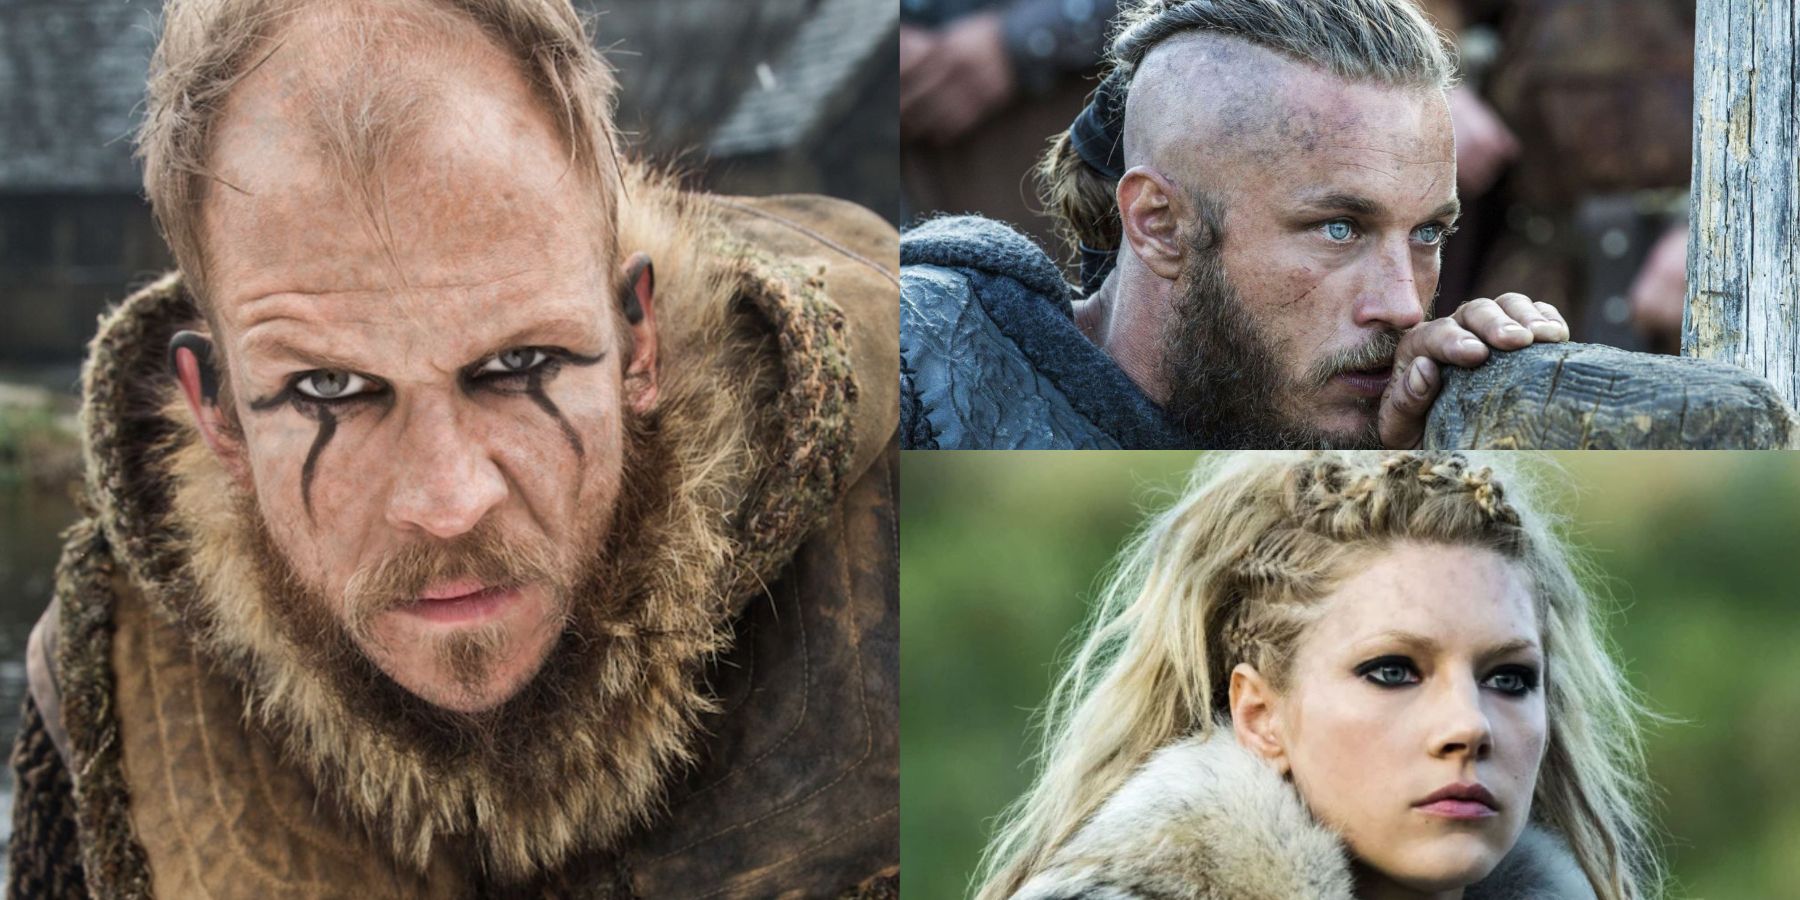 TOP 5 TOUGHEST VIKING WARRIORS OF ALL TIME